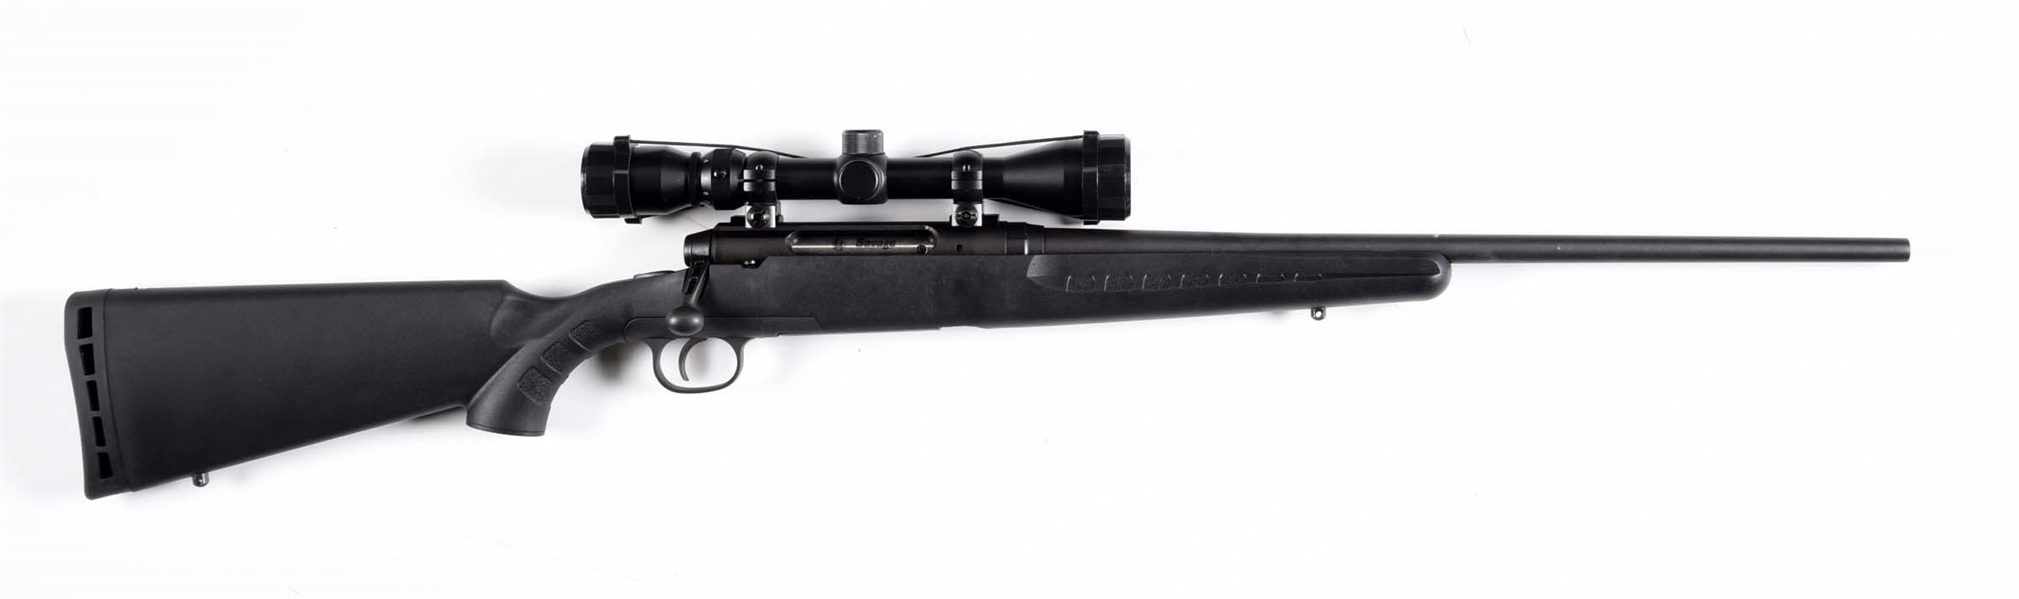 (M) SAVAGE AXIS BOLT ACTION RIFLE.